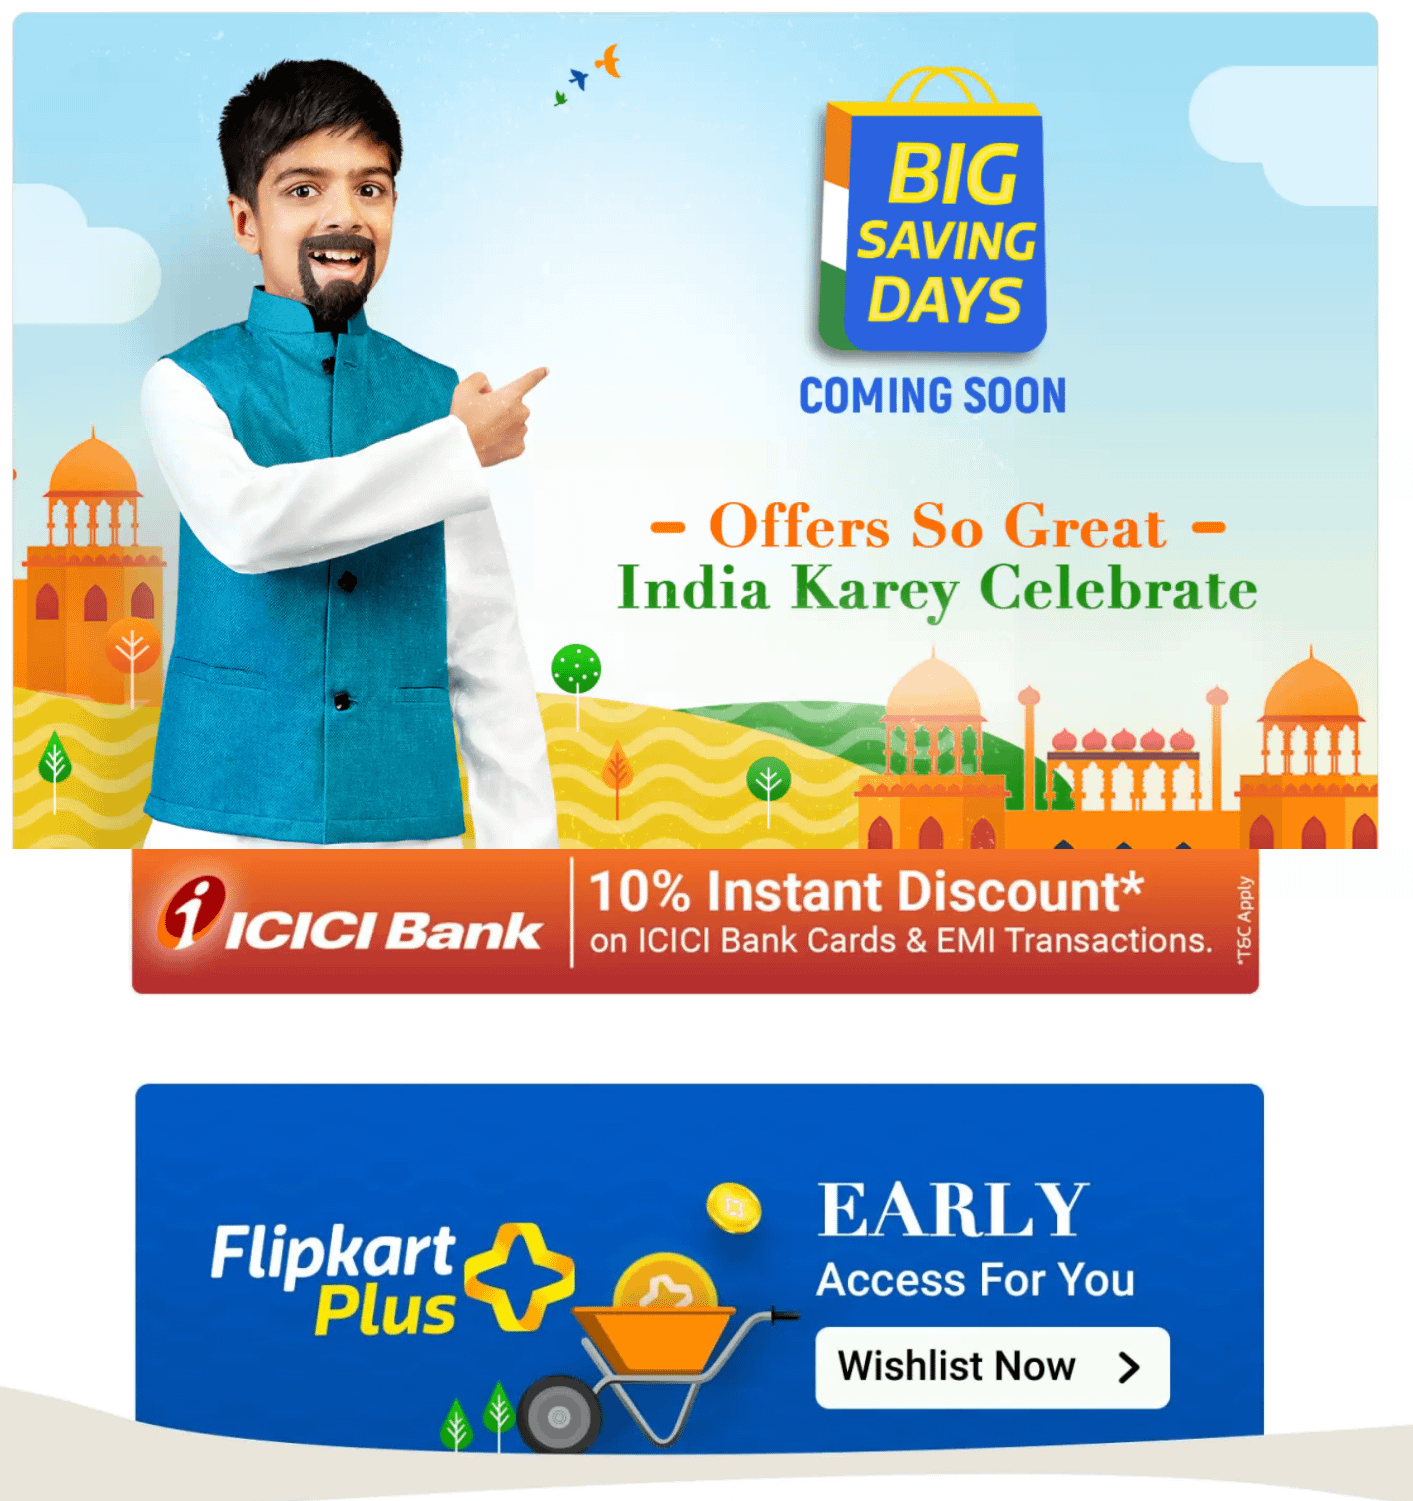 Flipkart Upcoming Sale Is From 17-01-2022 To 22-01-2022 post thumbnail image